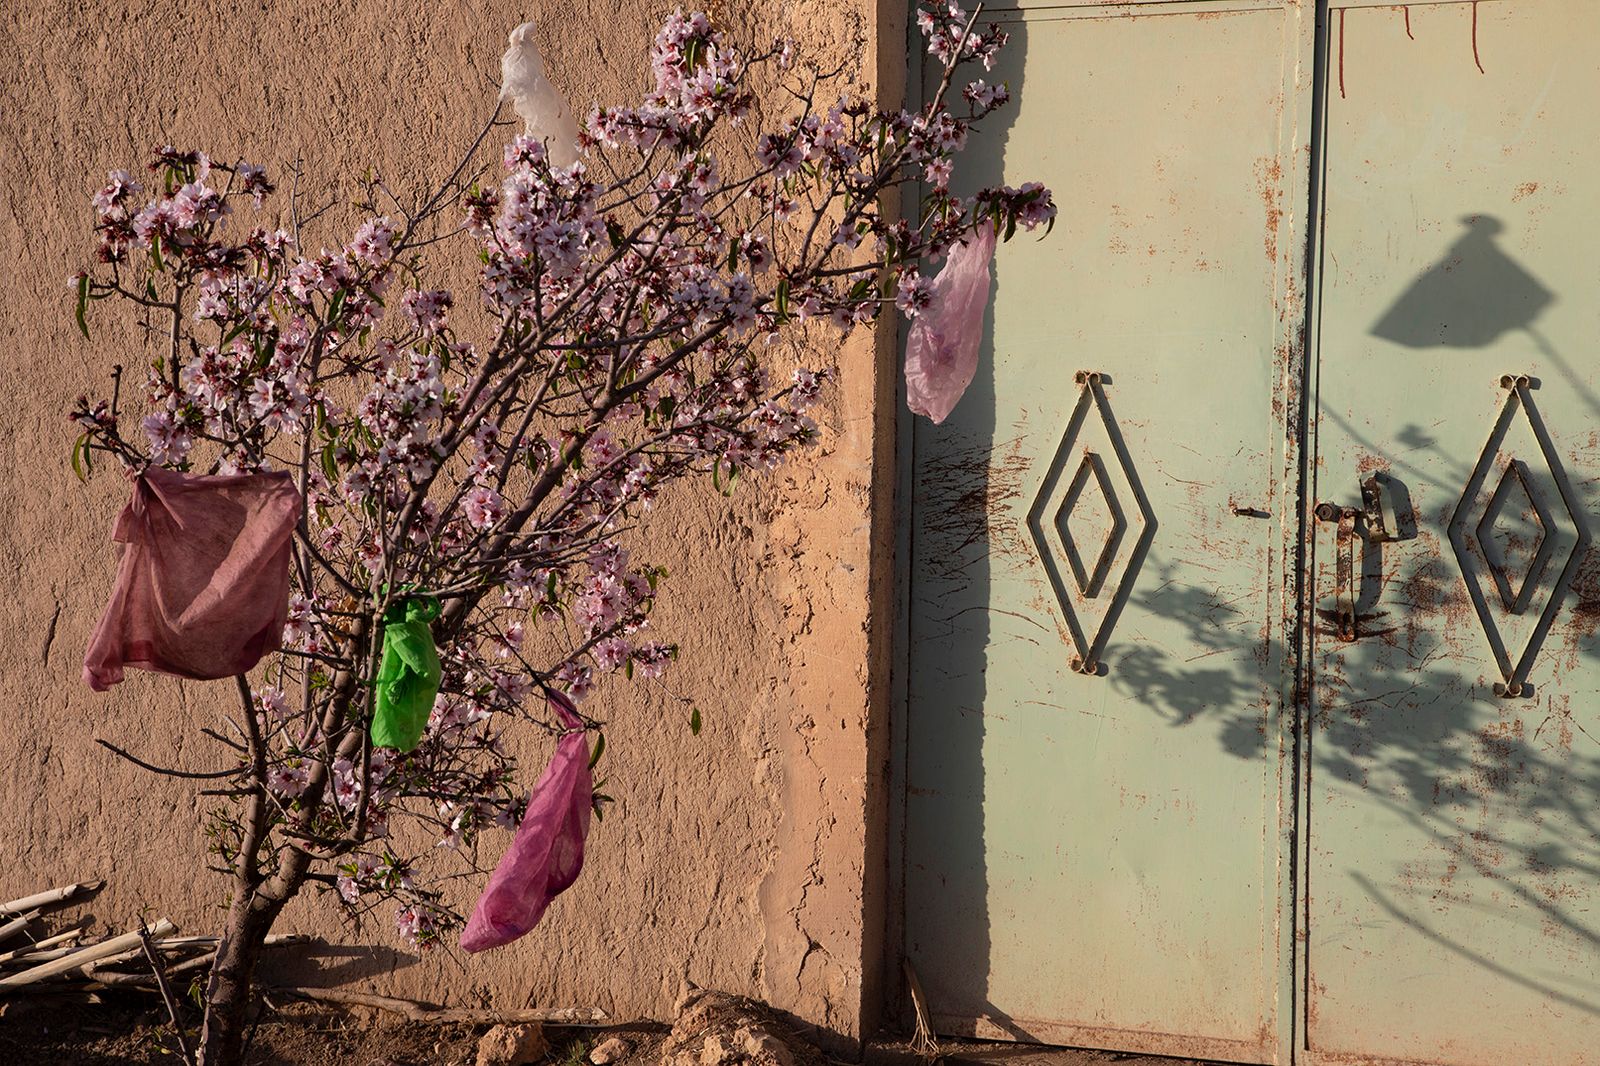 © Matilde Gattoni - Morocco - Erfoud - Detail of a fruit tree blooming in the streets of Erfoud.